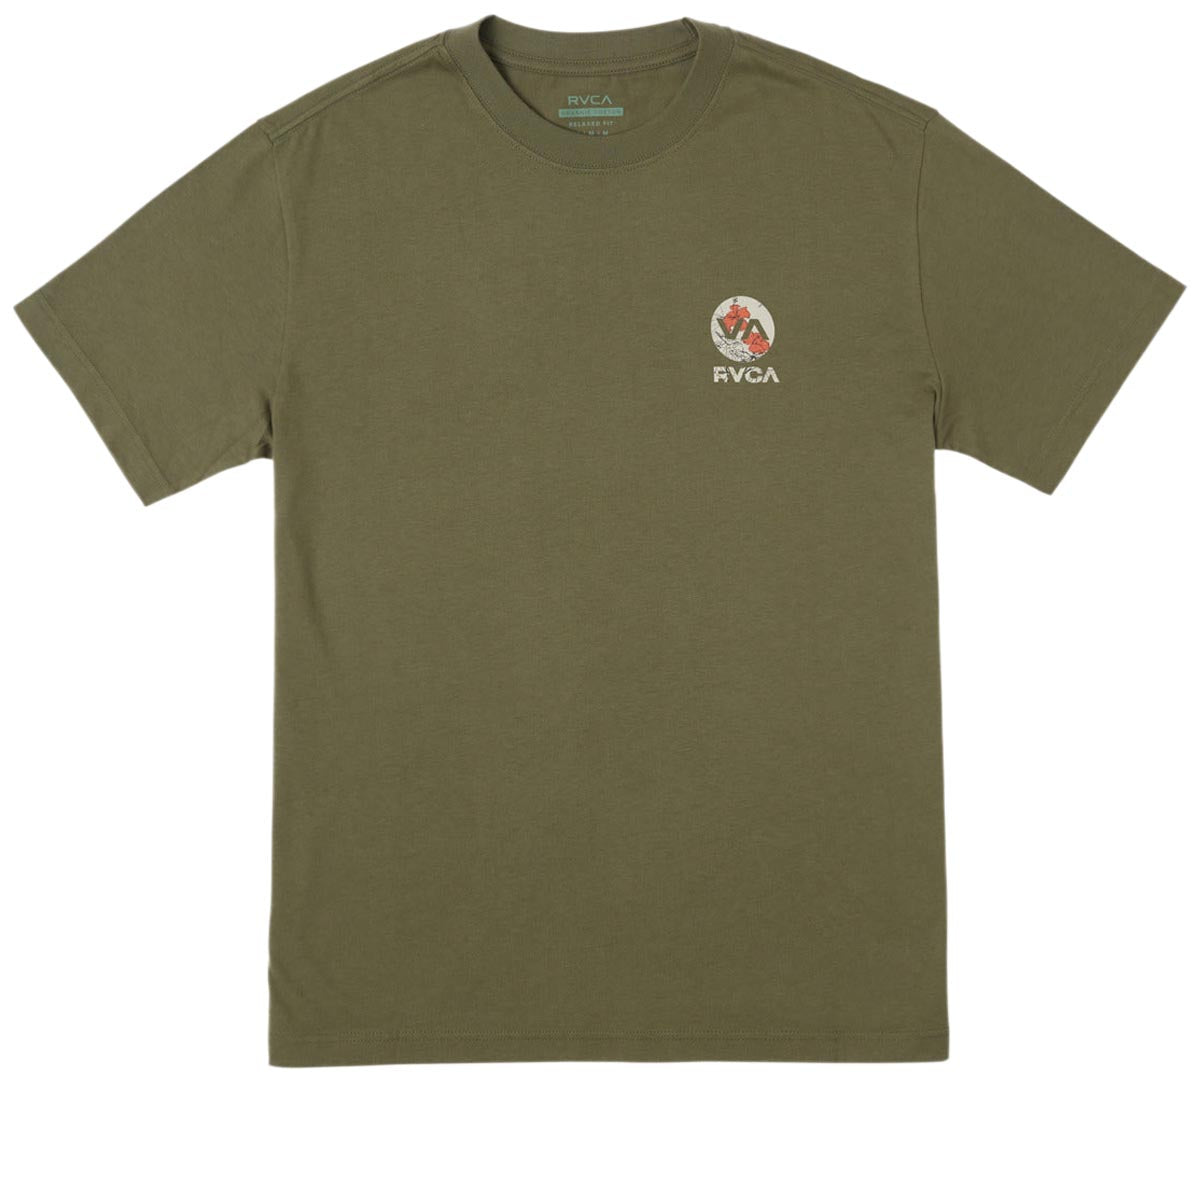 RVCA Drawn In T-Shirt - Olive image 2